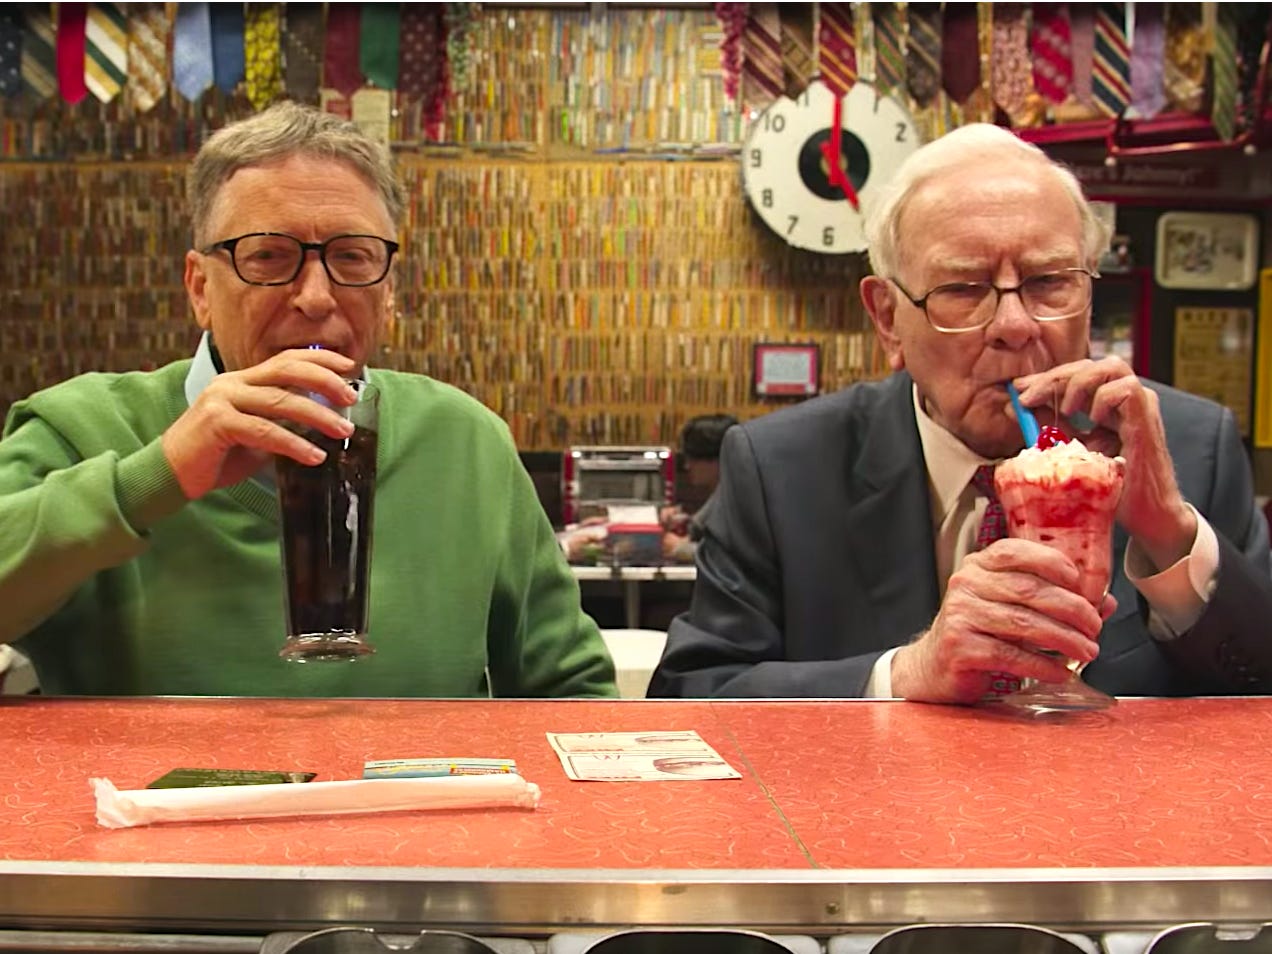 <p>Buffett once went to McDonald's in Hong Kong with <a href="https://www.businessinsider.com/bill-gates-warren-buffett-friendship-2018-3">longtime friend Bill Gates</a> and paid with coupons, Gates reminisced in his <a href="https://www.gatesnotes.com/2017-Annual-Letter?WT.mc_id=02_14_2017_02_AL2017_BG-GW_" rel="noopener">2017 annual letter</a>.</p><p>The letter reads: "Remember the laugh we had when we traveled together to Hong Kong and decided to get lunch at McDonald's? You offered to pay, dug into your pocket, and pulled out…coupons!"</p><p>Gates has described Buffett as a "thoughtful and kind" friend, and has said that every time he visits Omaha, <a href="https://www.gatesnotes.com/25-Years-of-Learning-and-Laughter?WT.mc_id=12_20_2016_10_YIR2016NewsBuffett_BG-EM_&WT.tsrc=BGEM" rel="noopener">Buffett drives to the airport to pick him up</a>.</p>